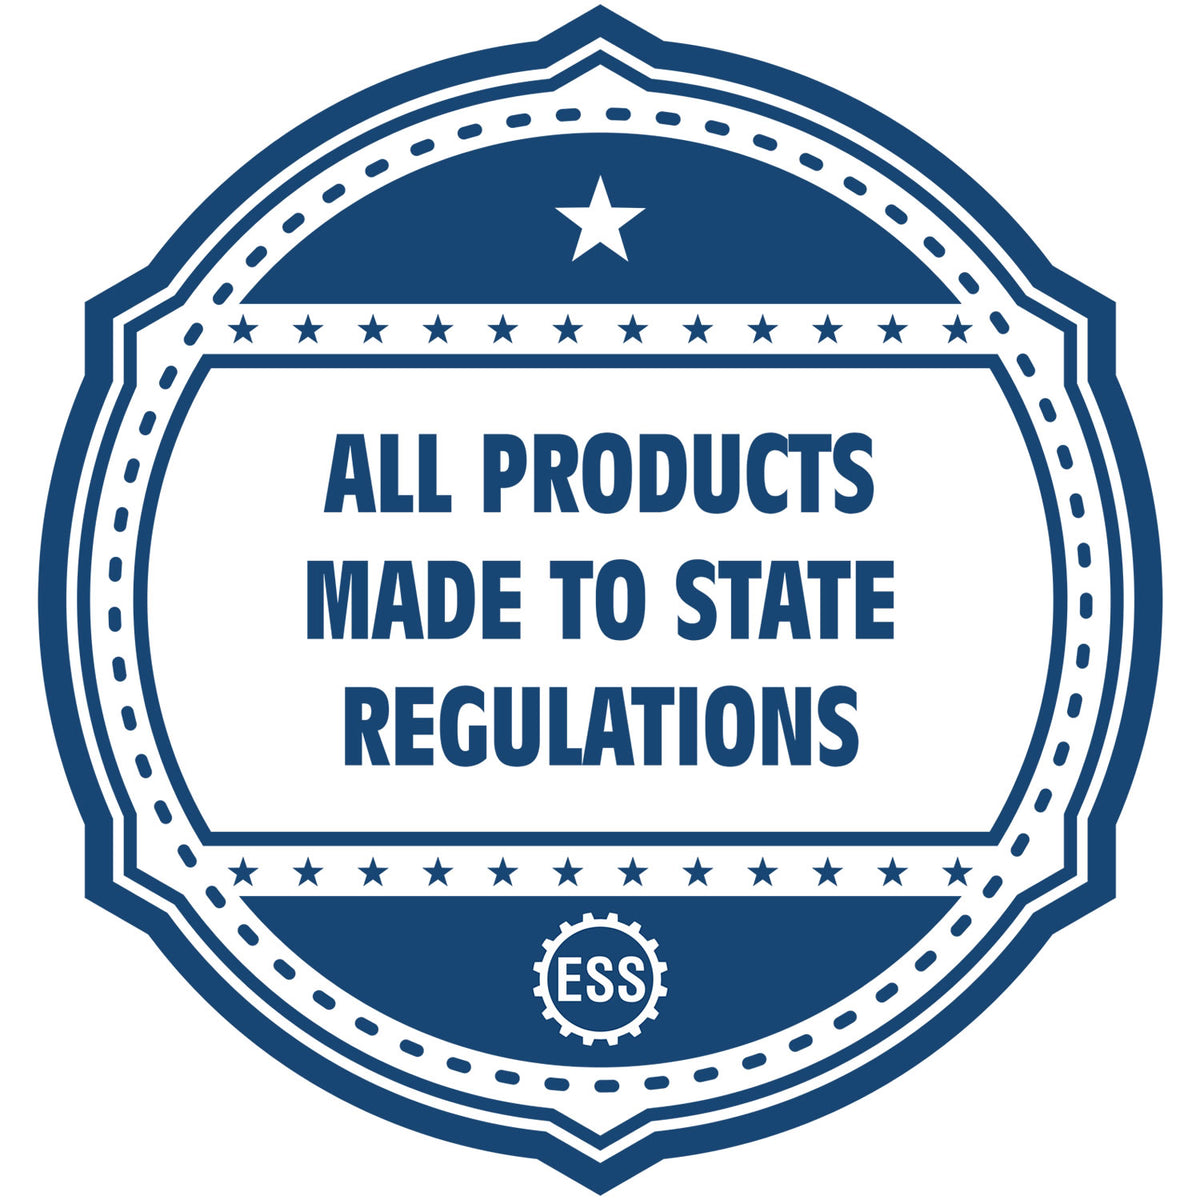 An icon or badge element for the Premium MaxLight Pre-Inked Virginia Engineering Stamp showing that this product is made in compliance with state regulations.